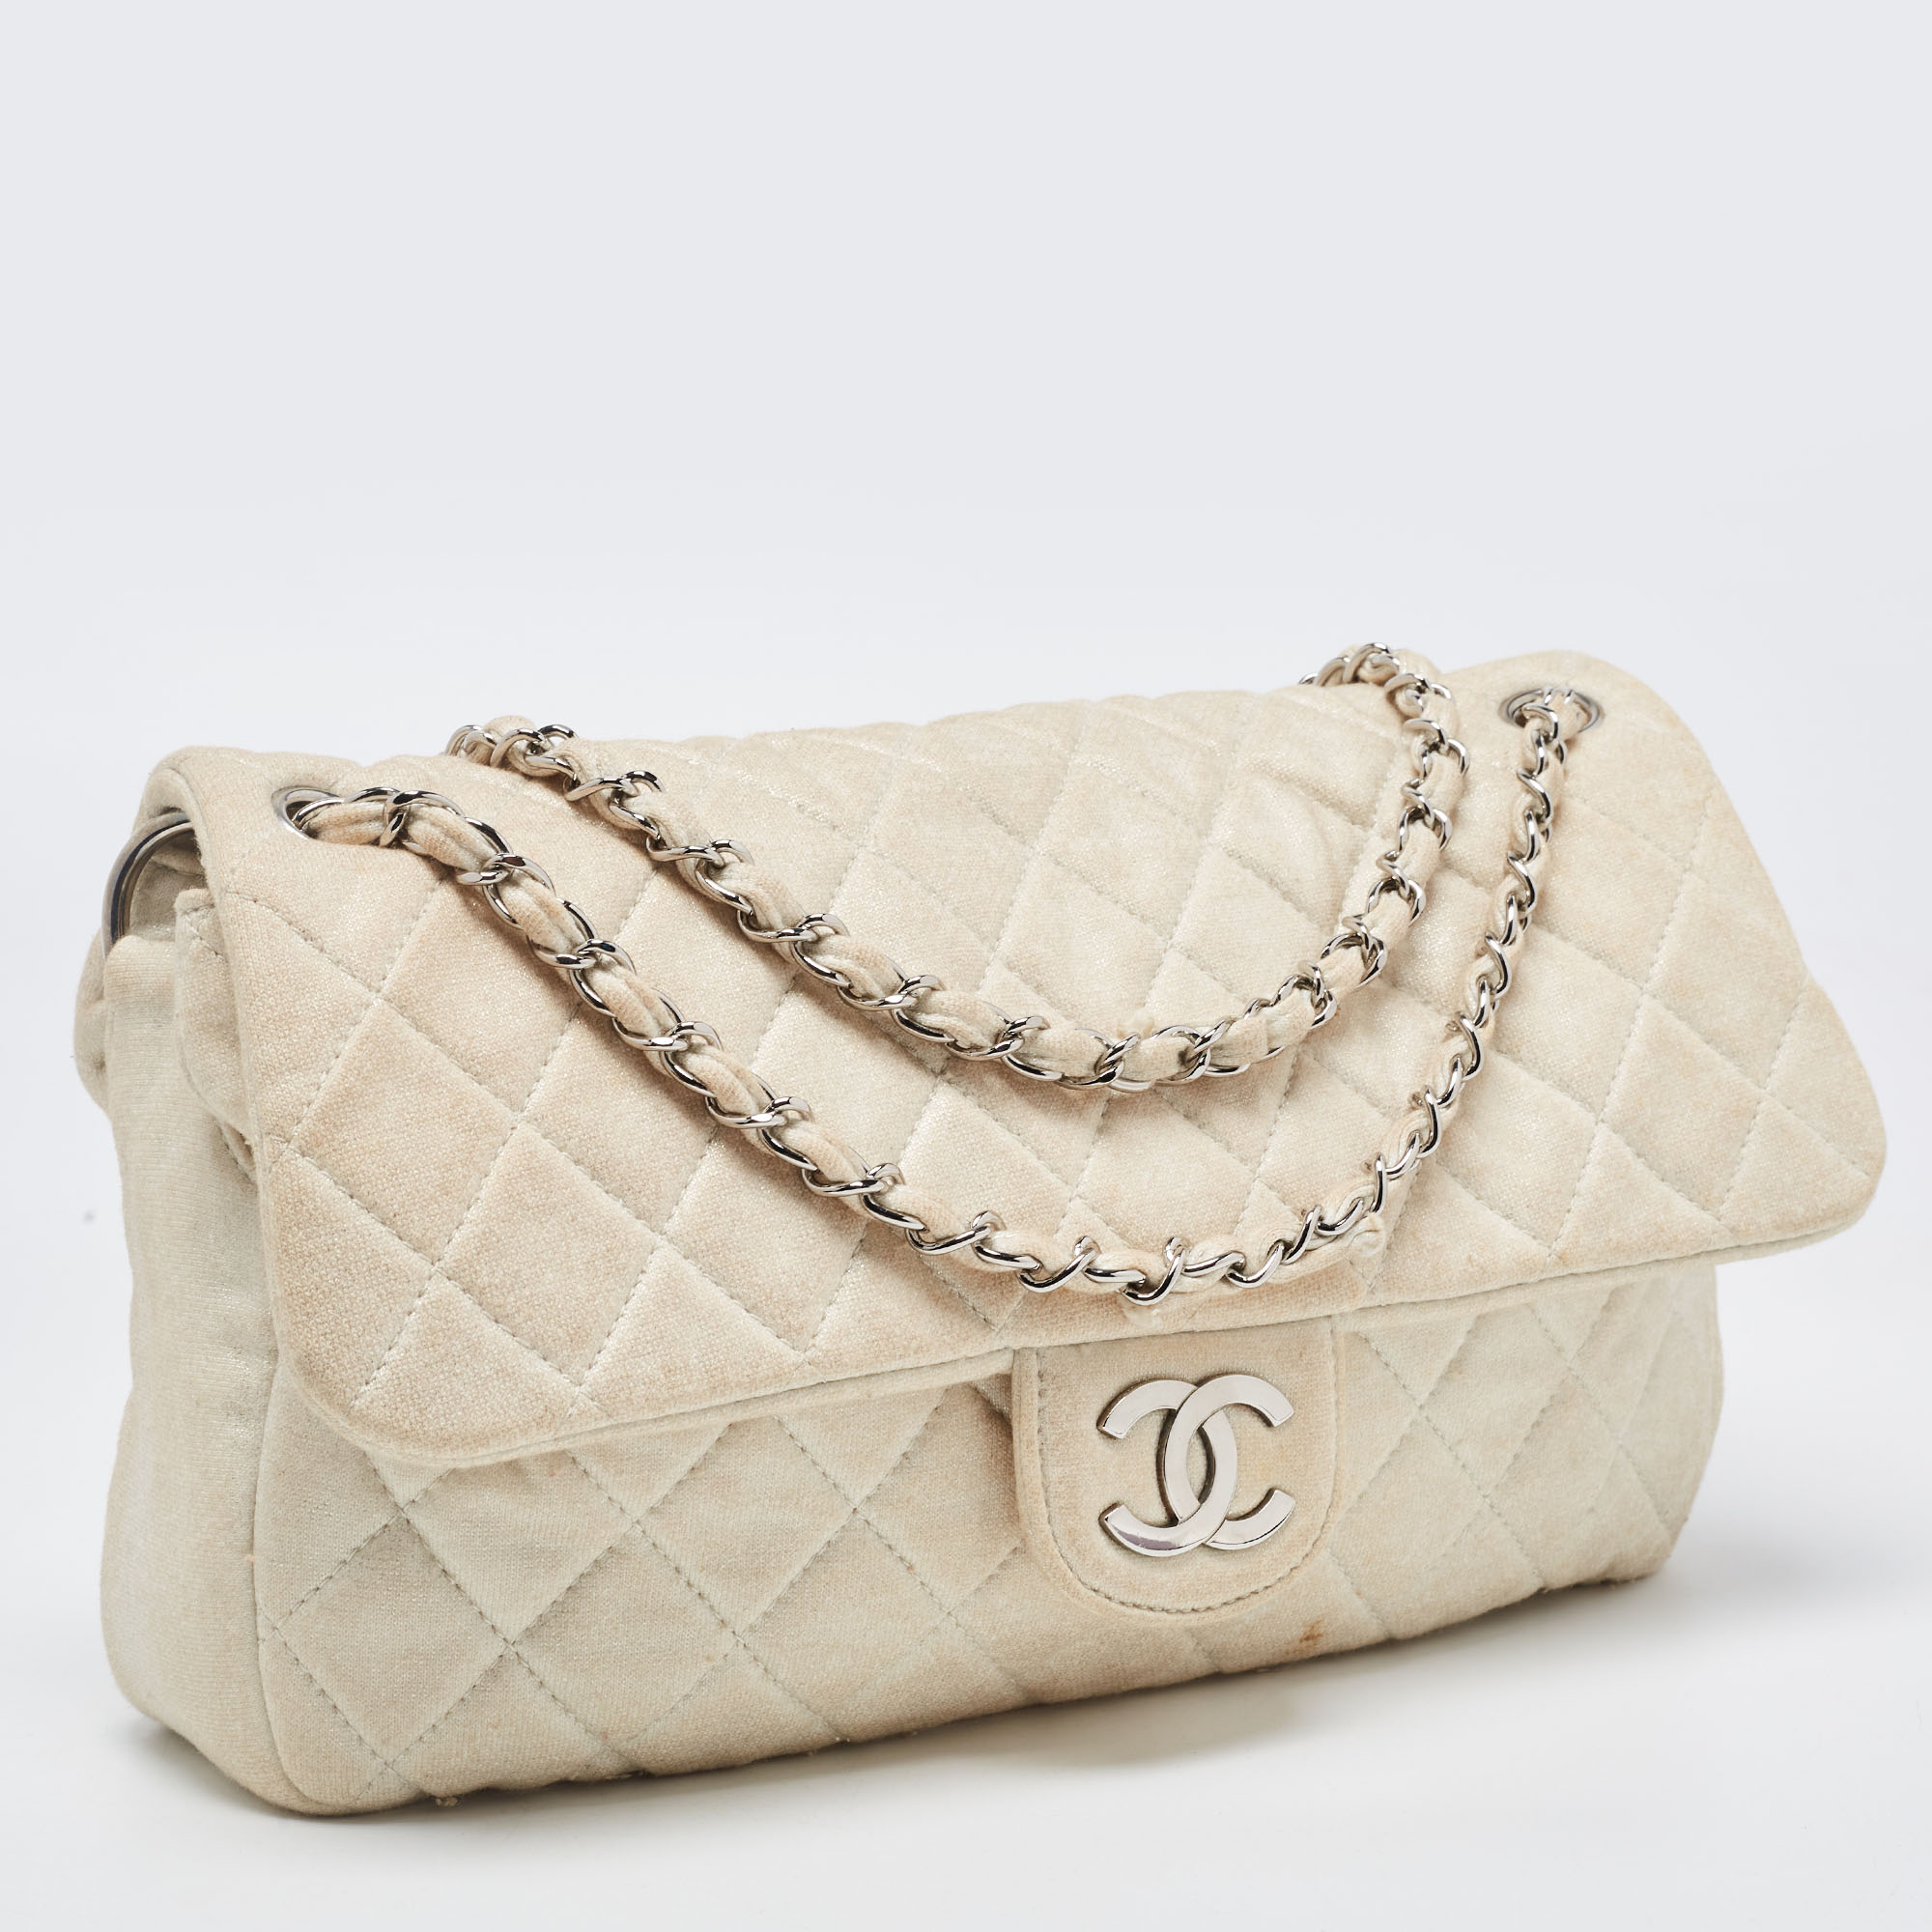 Chanel White/Gold Quilted Jersey CC Flap Bag